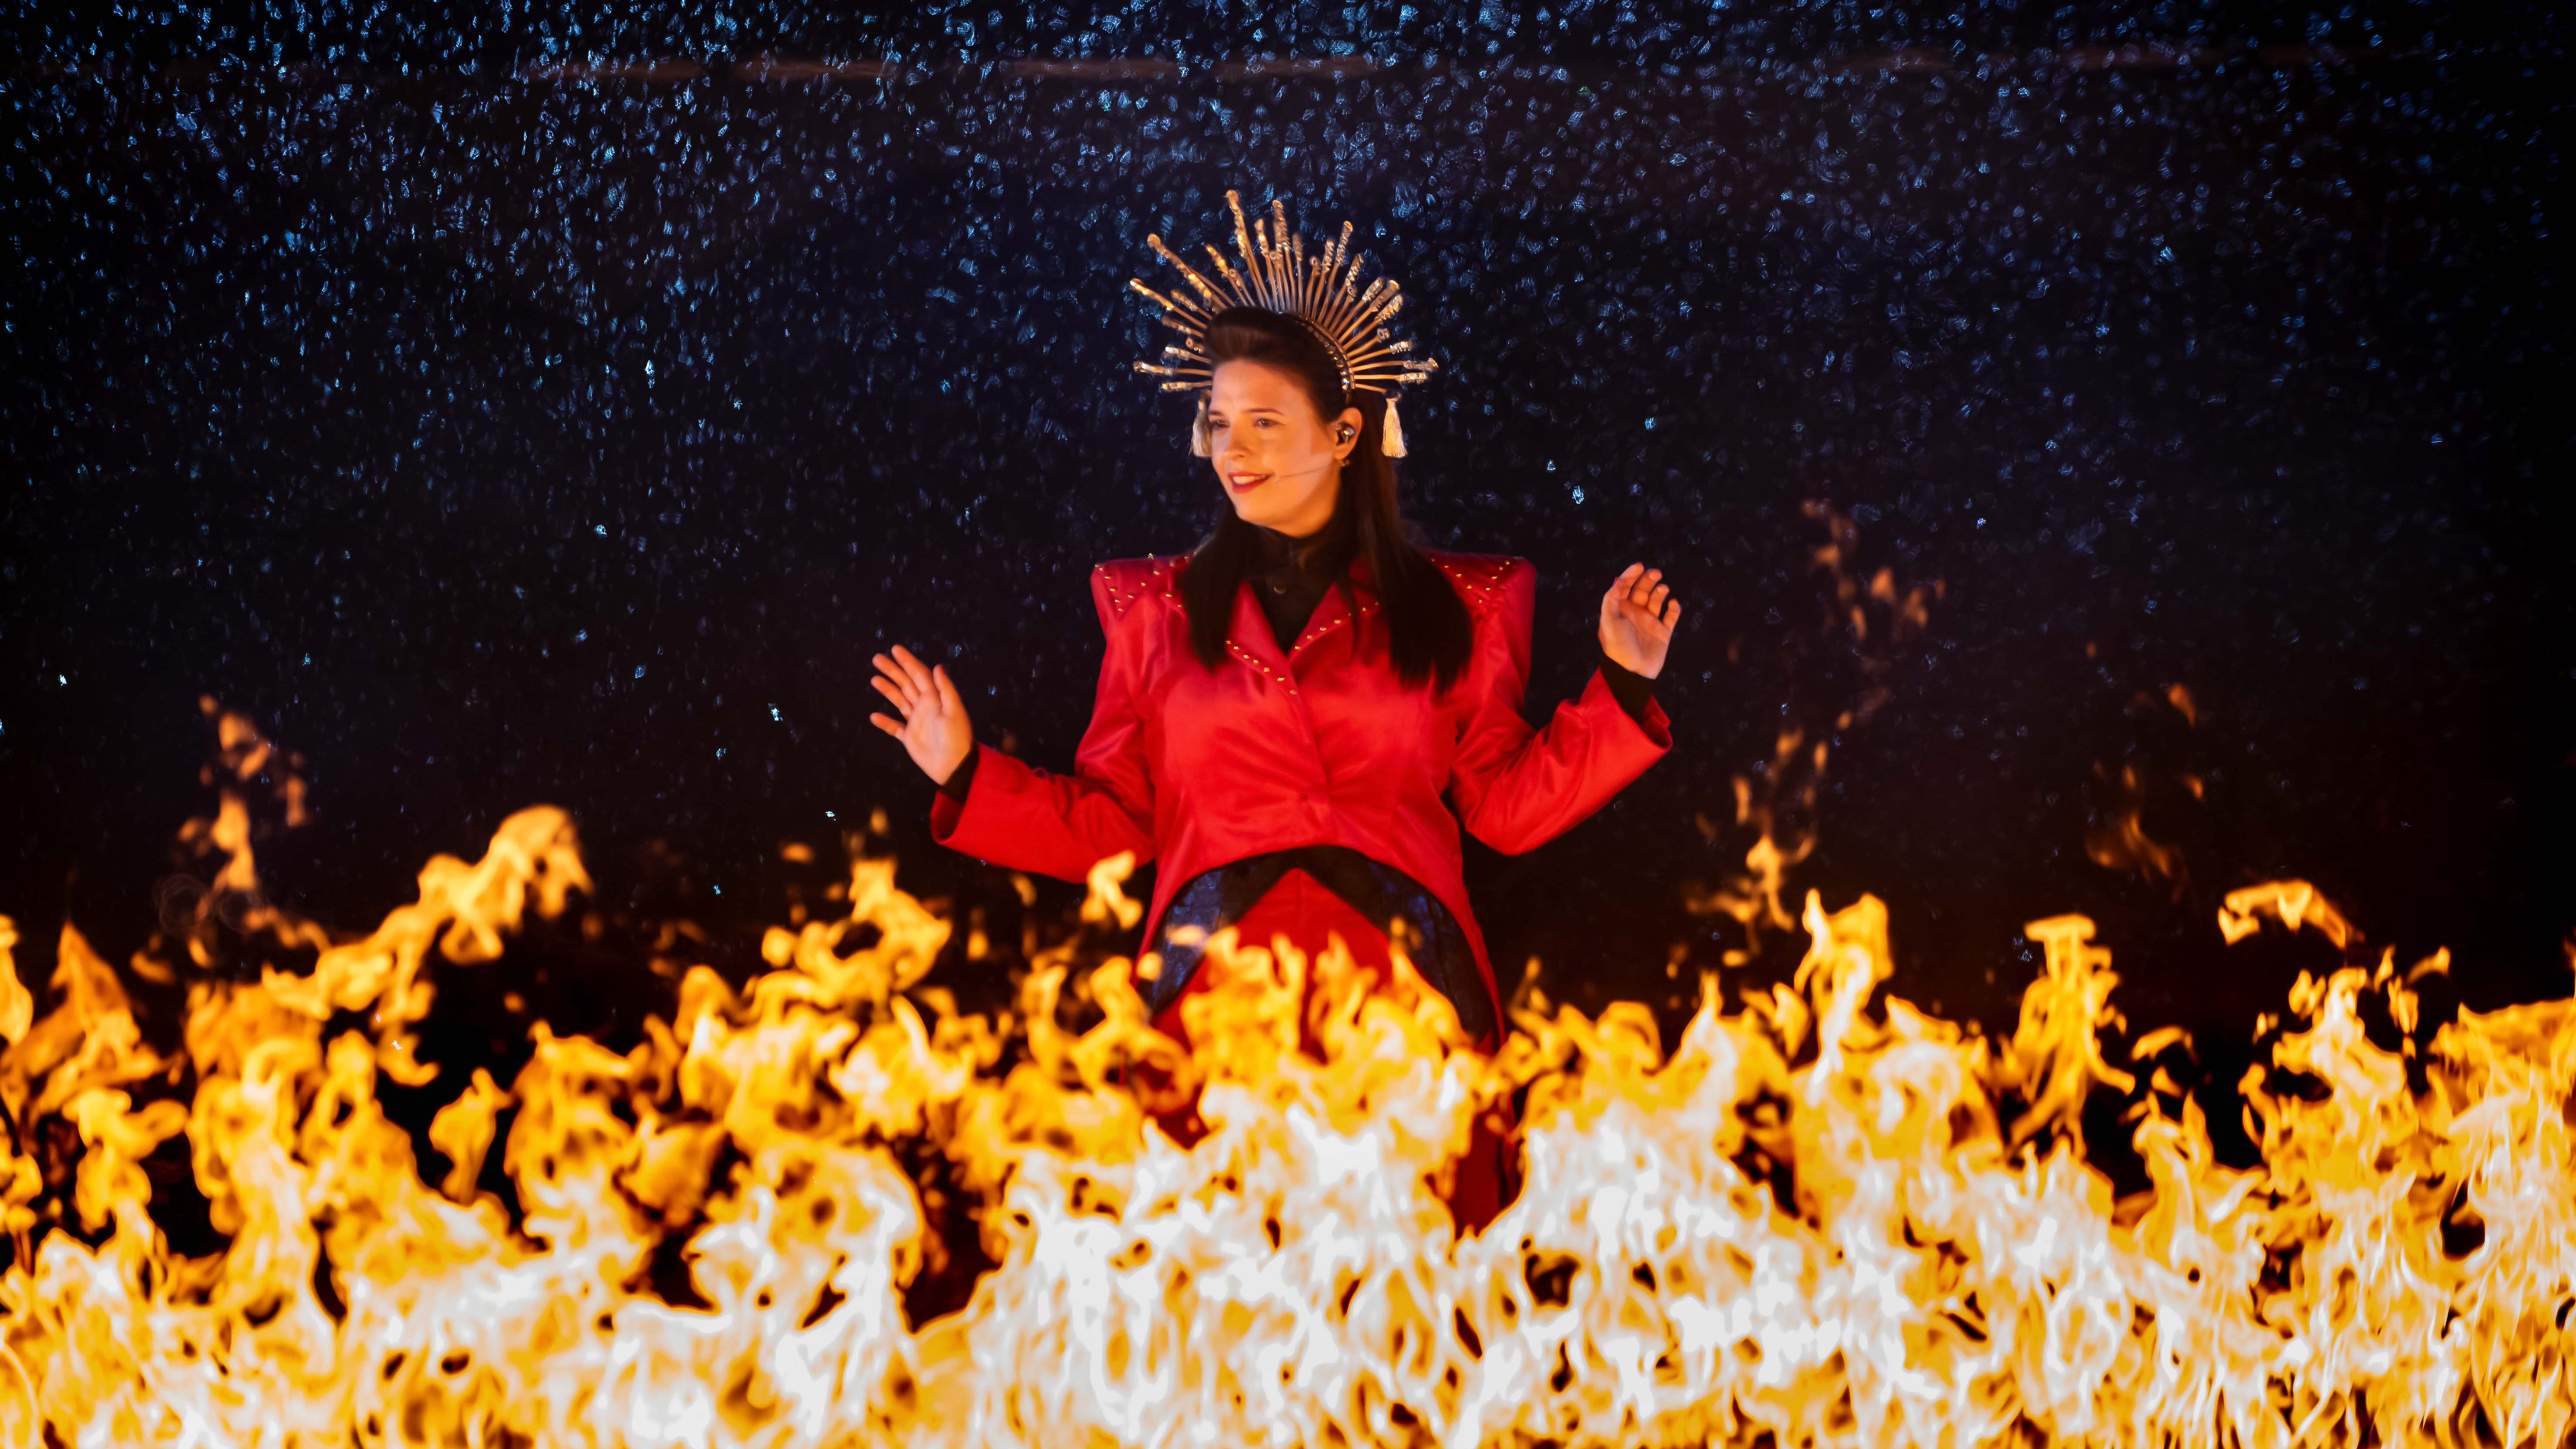 A young woman wearing a red jacket and an angel-like headress rises above the flames.